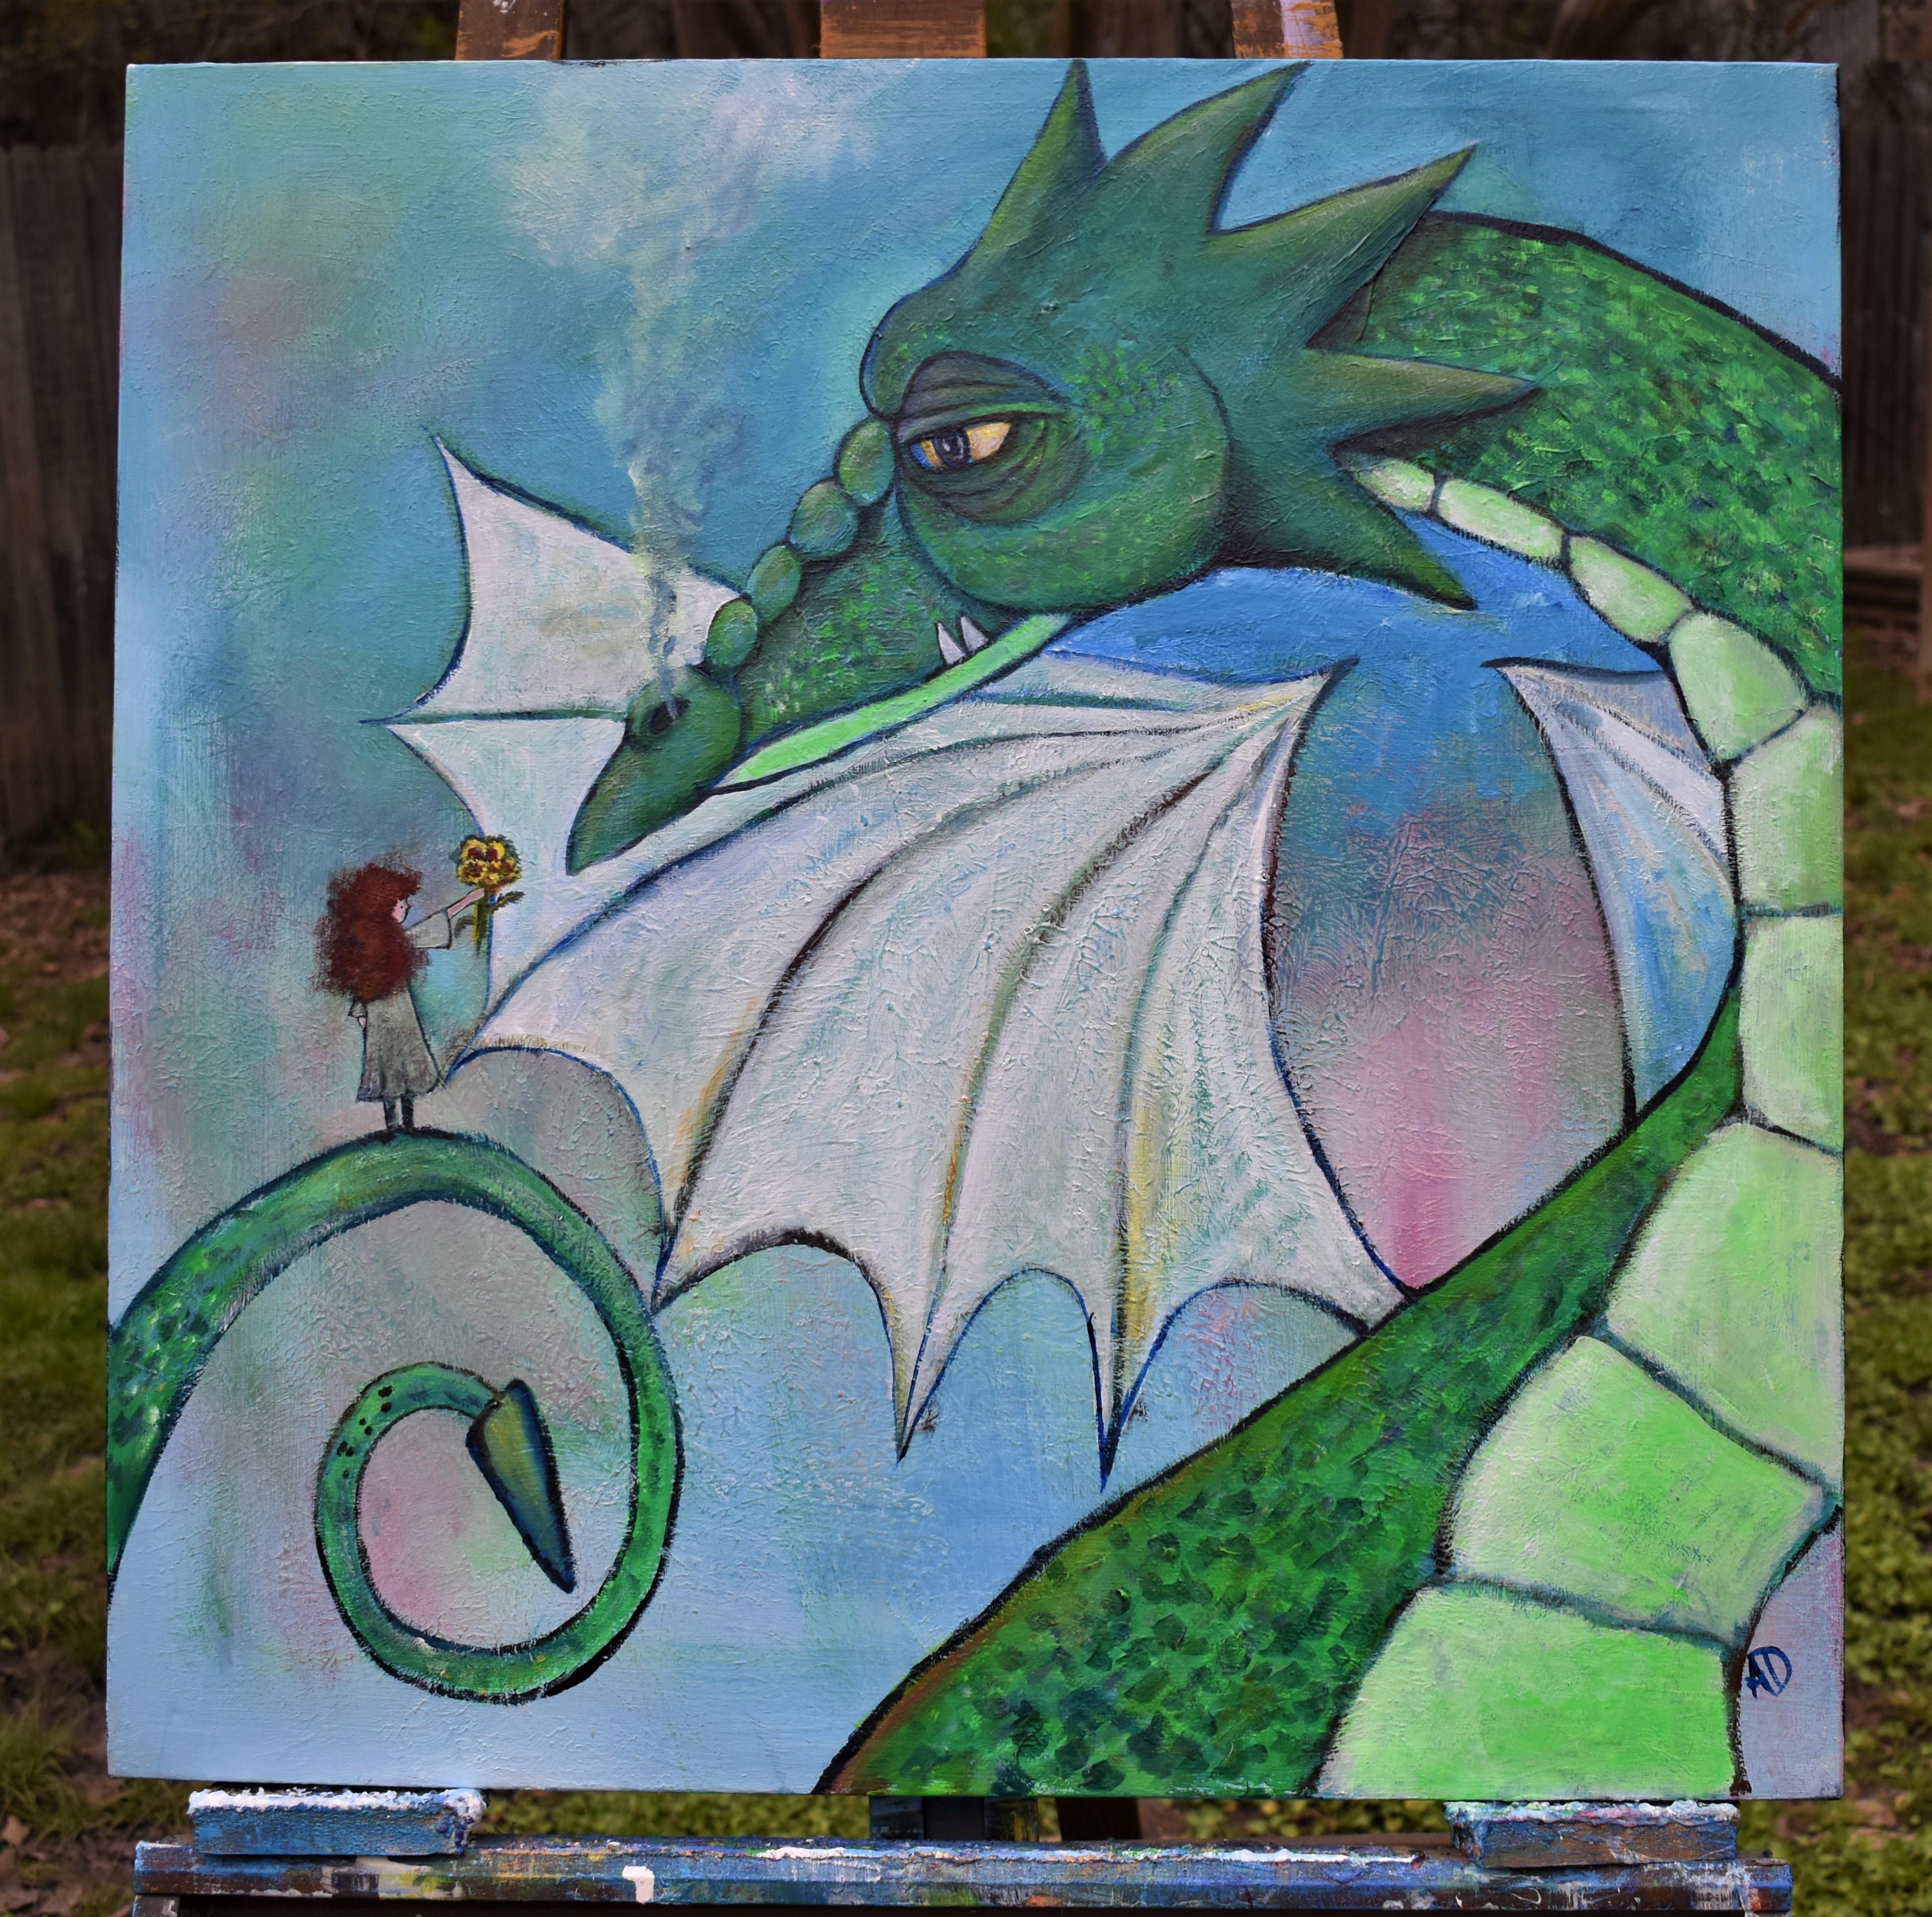 <p>Artist Comments<br>Everyone said the old dragon was grouchy, grumpy, and mean. Some even said he was dangerous and should be left alone. 